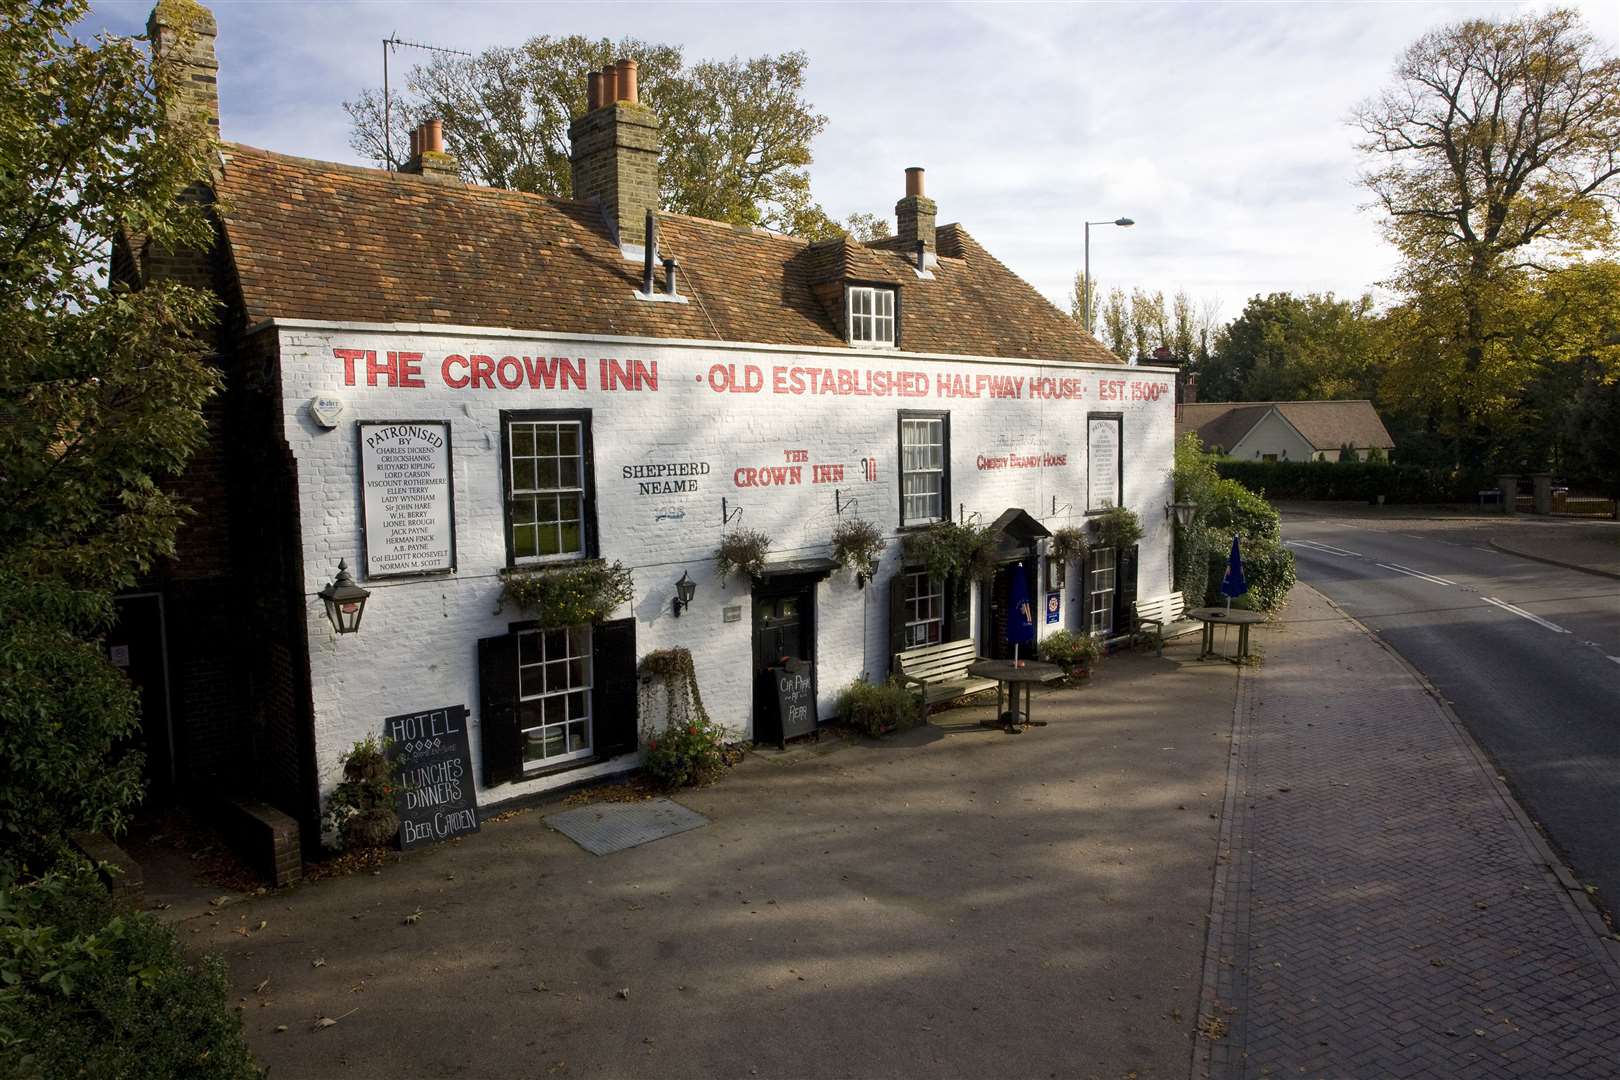 Husband and wife Emma and Derick Simms have taken over the Crown Inn in Sarre